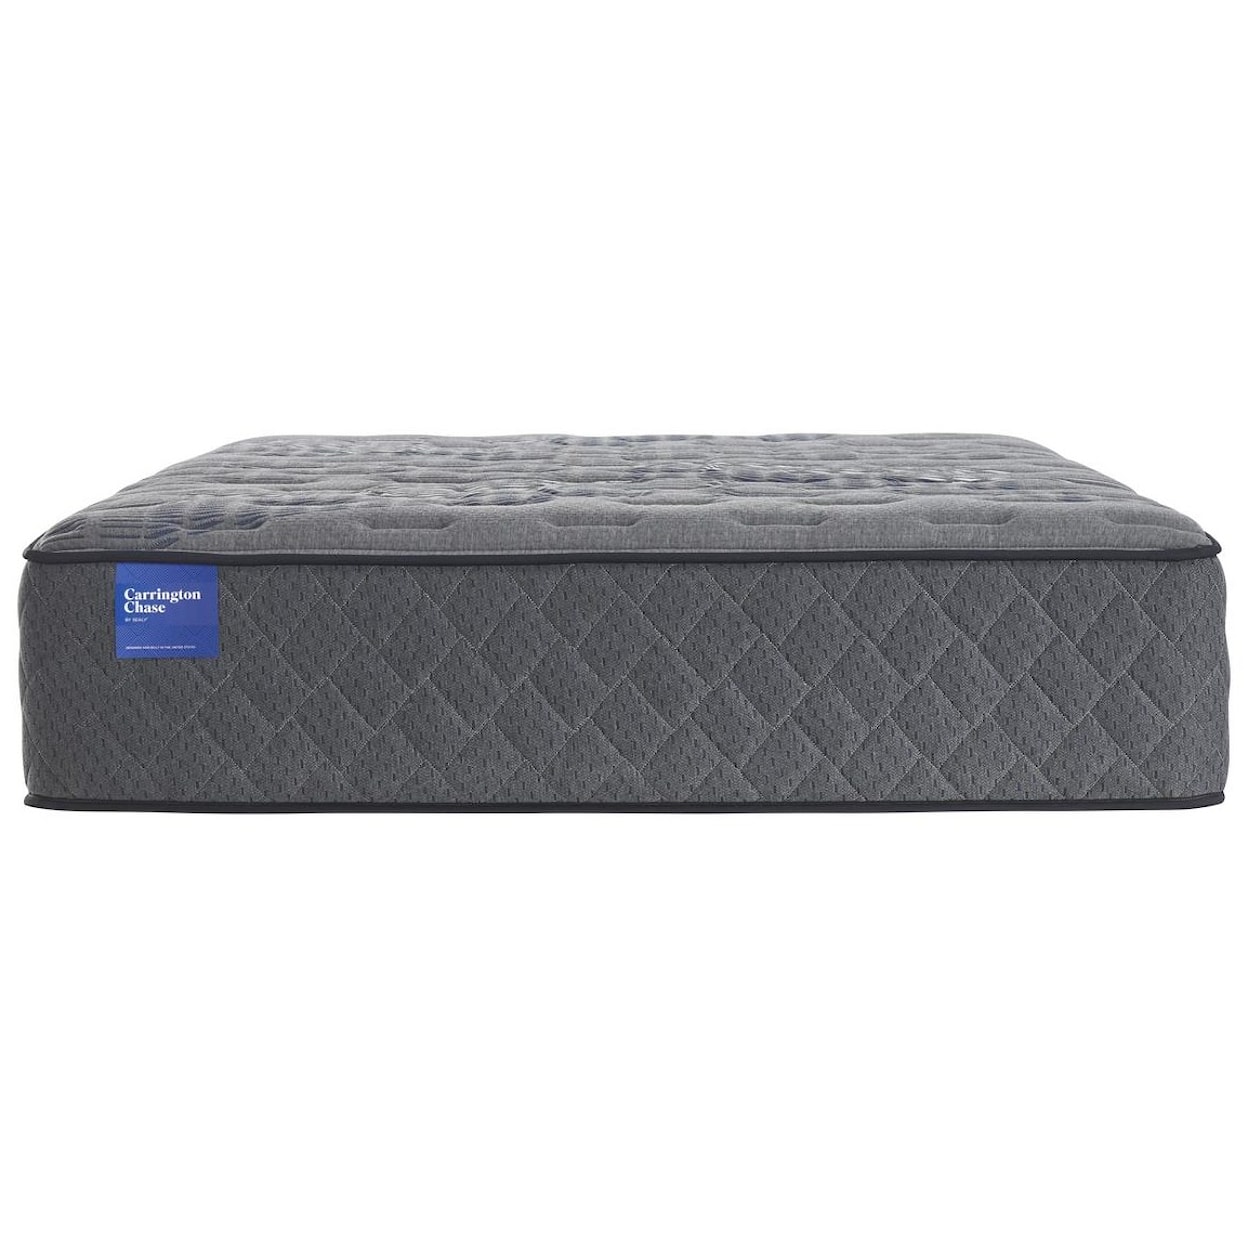 Sealy Sealy Posturepedic Westferry Plush Queen Sealy 15.5" Plush Mattress